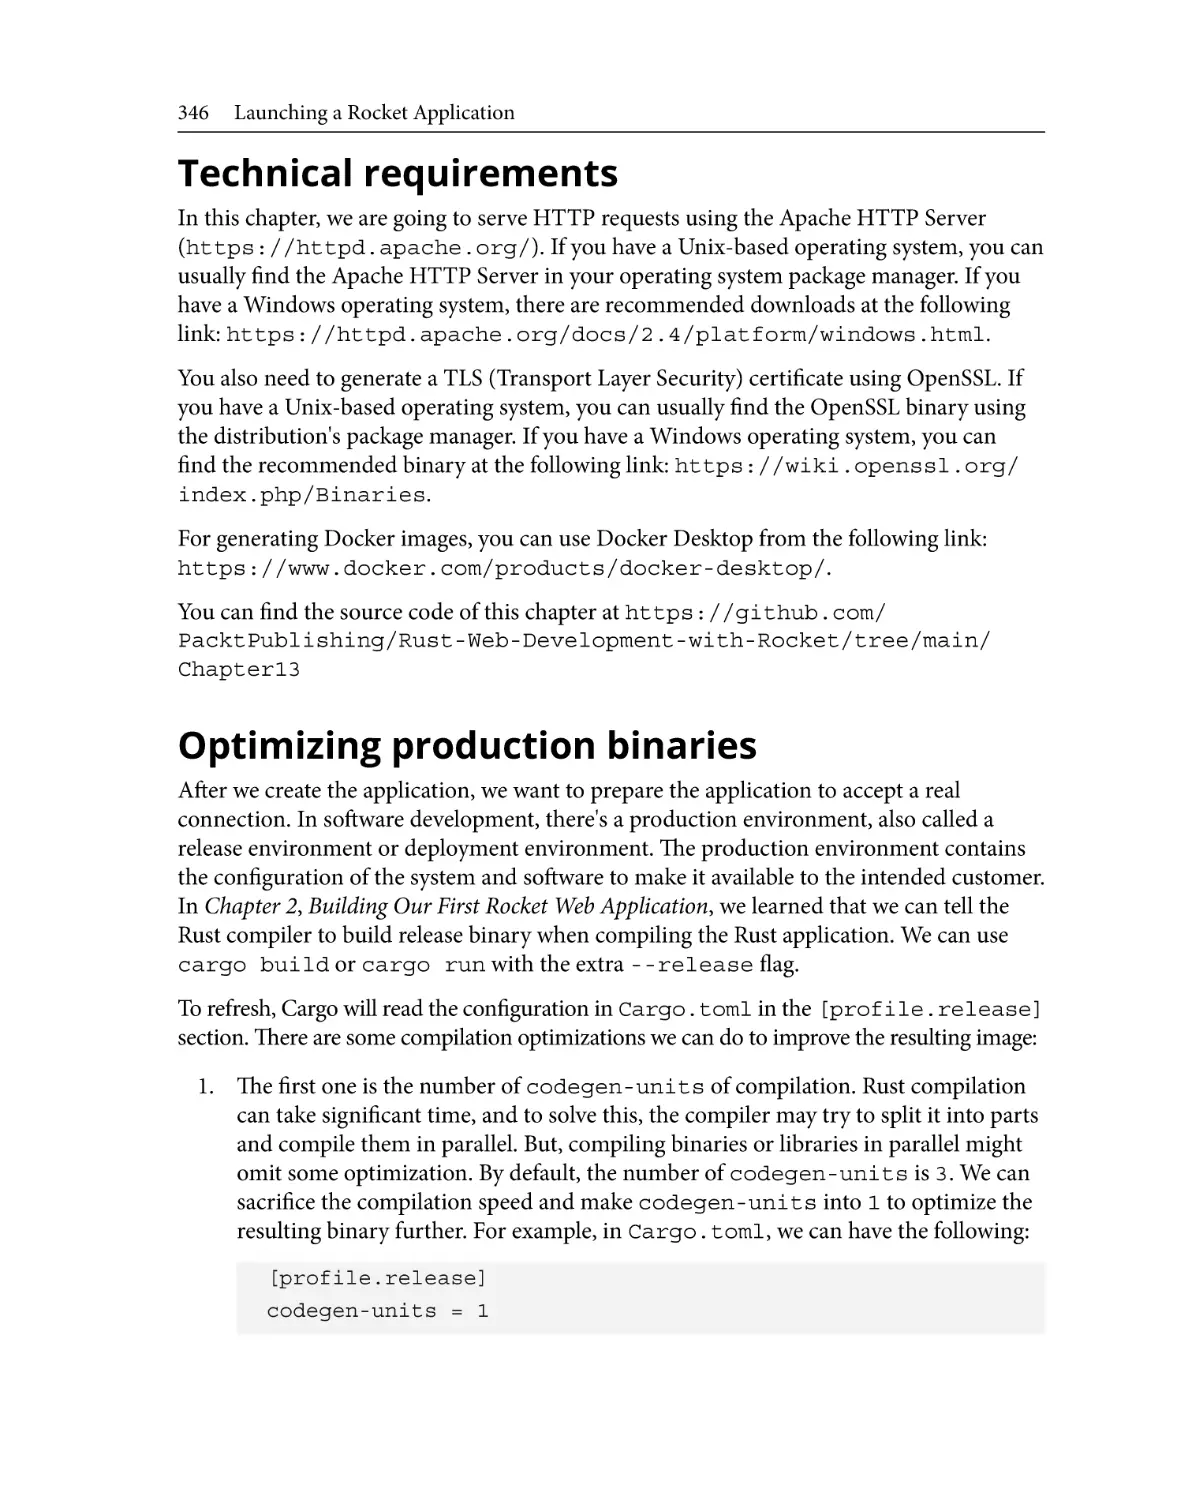 Technical requirements
Optimizing production binaries